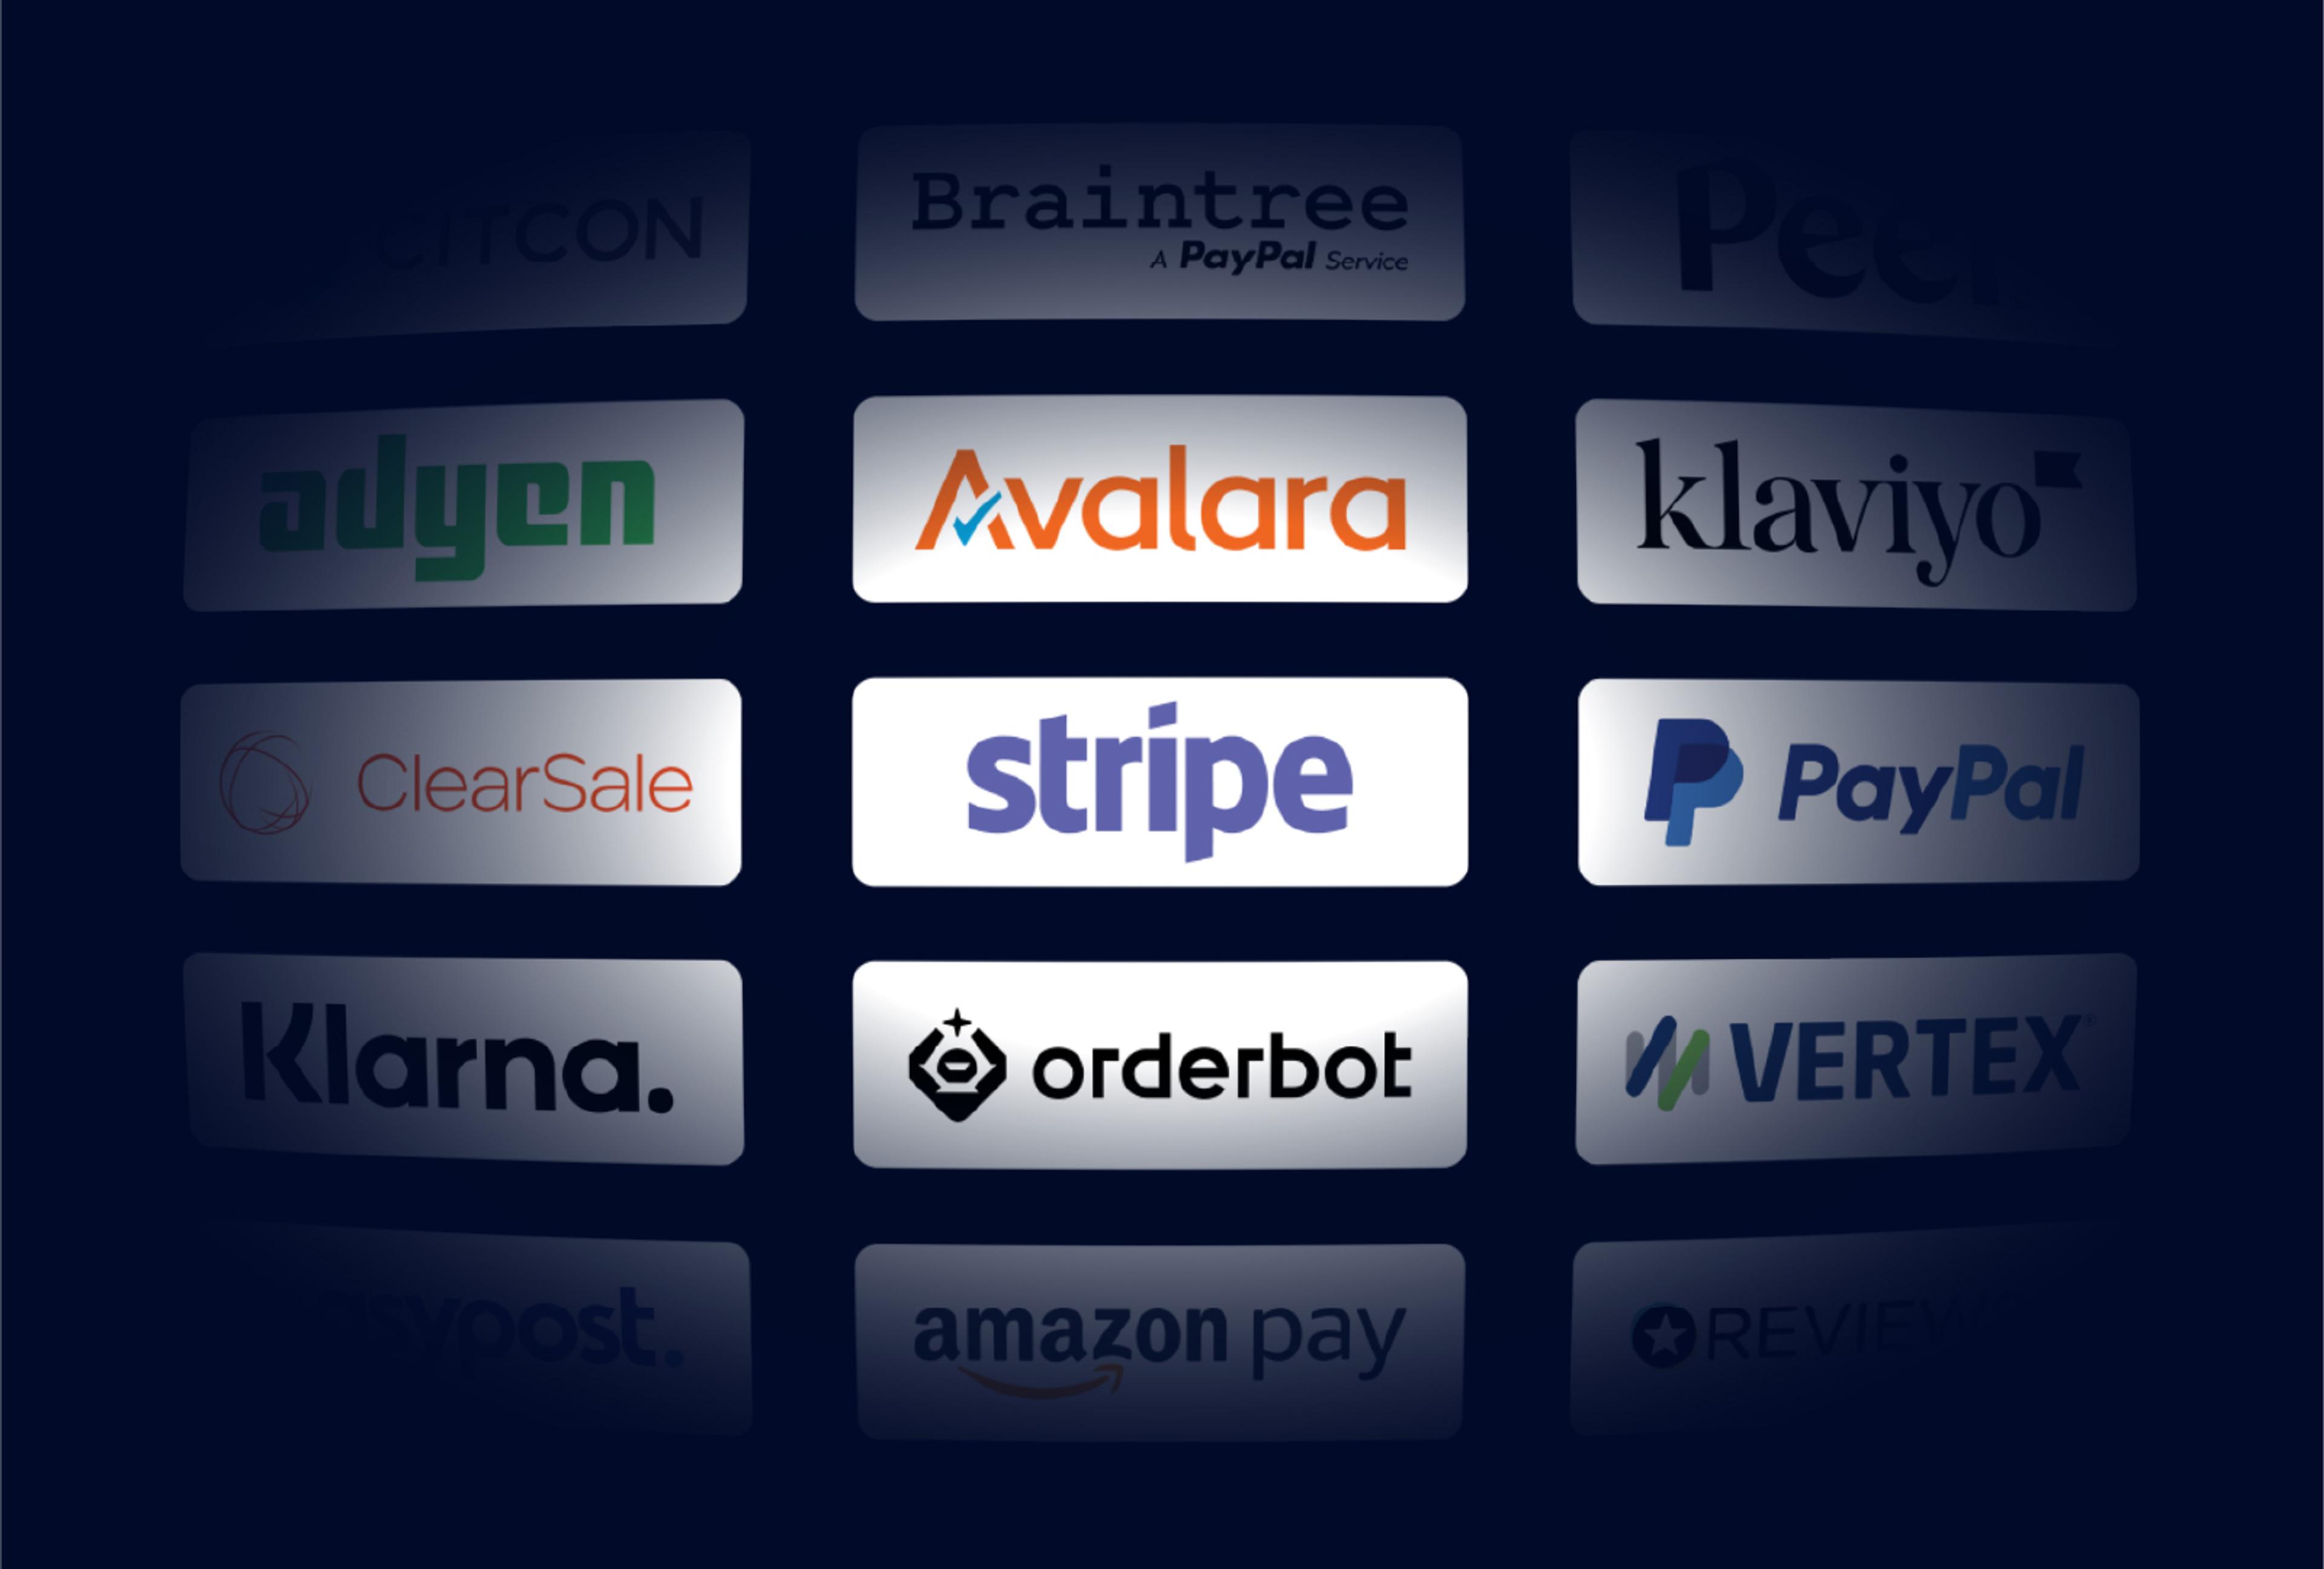 Logos of the companies that integrate with our checkout